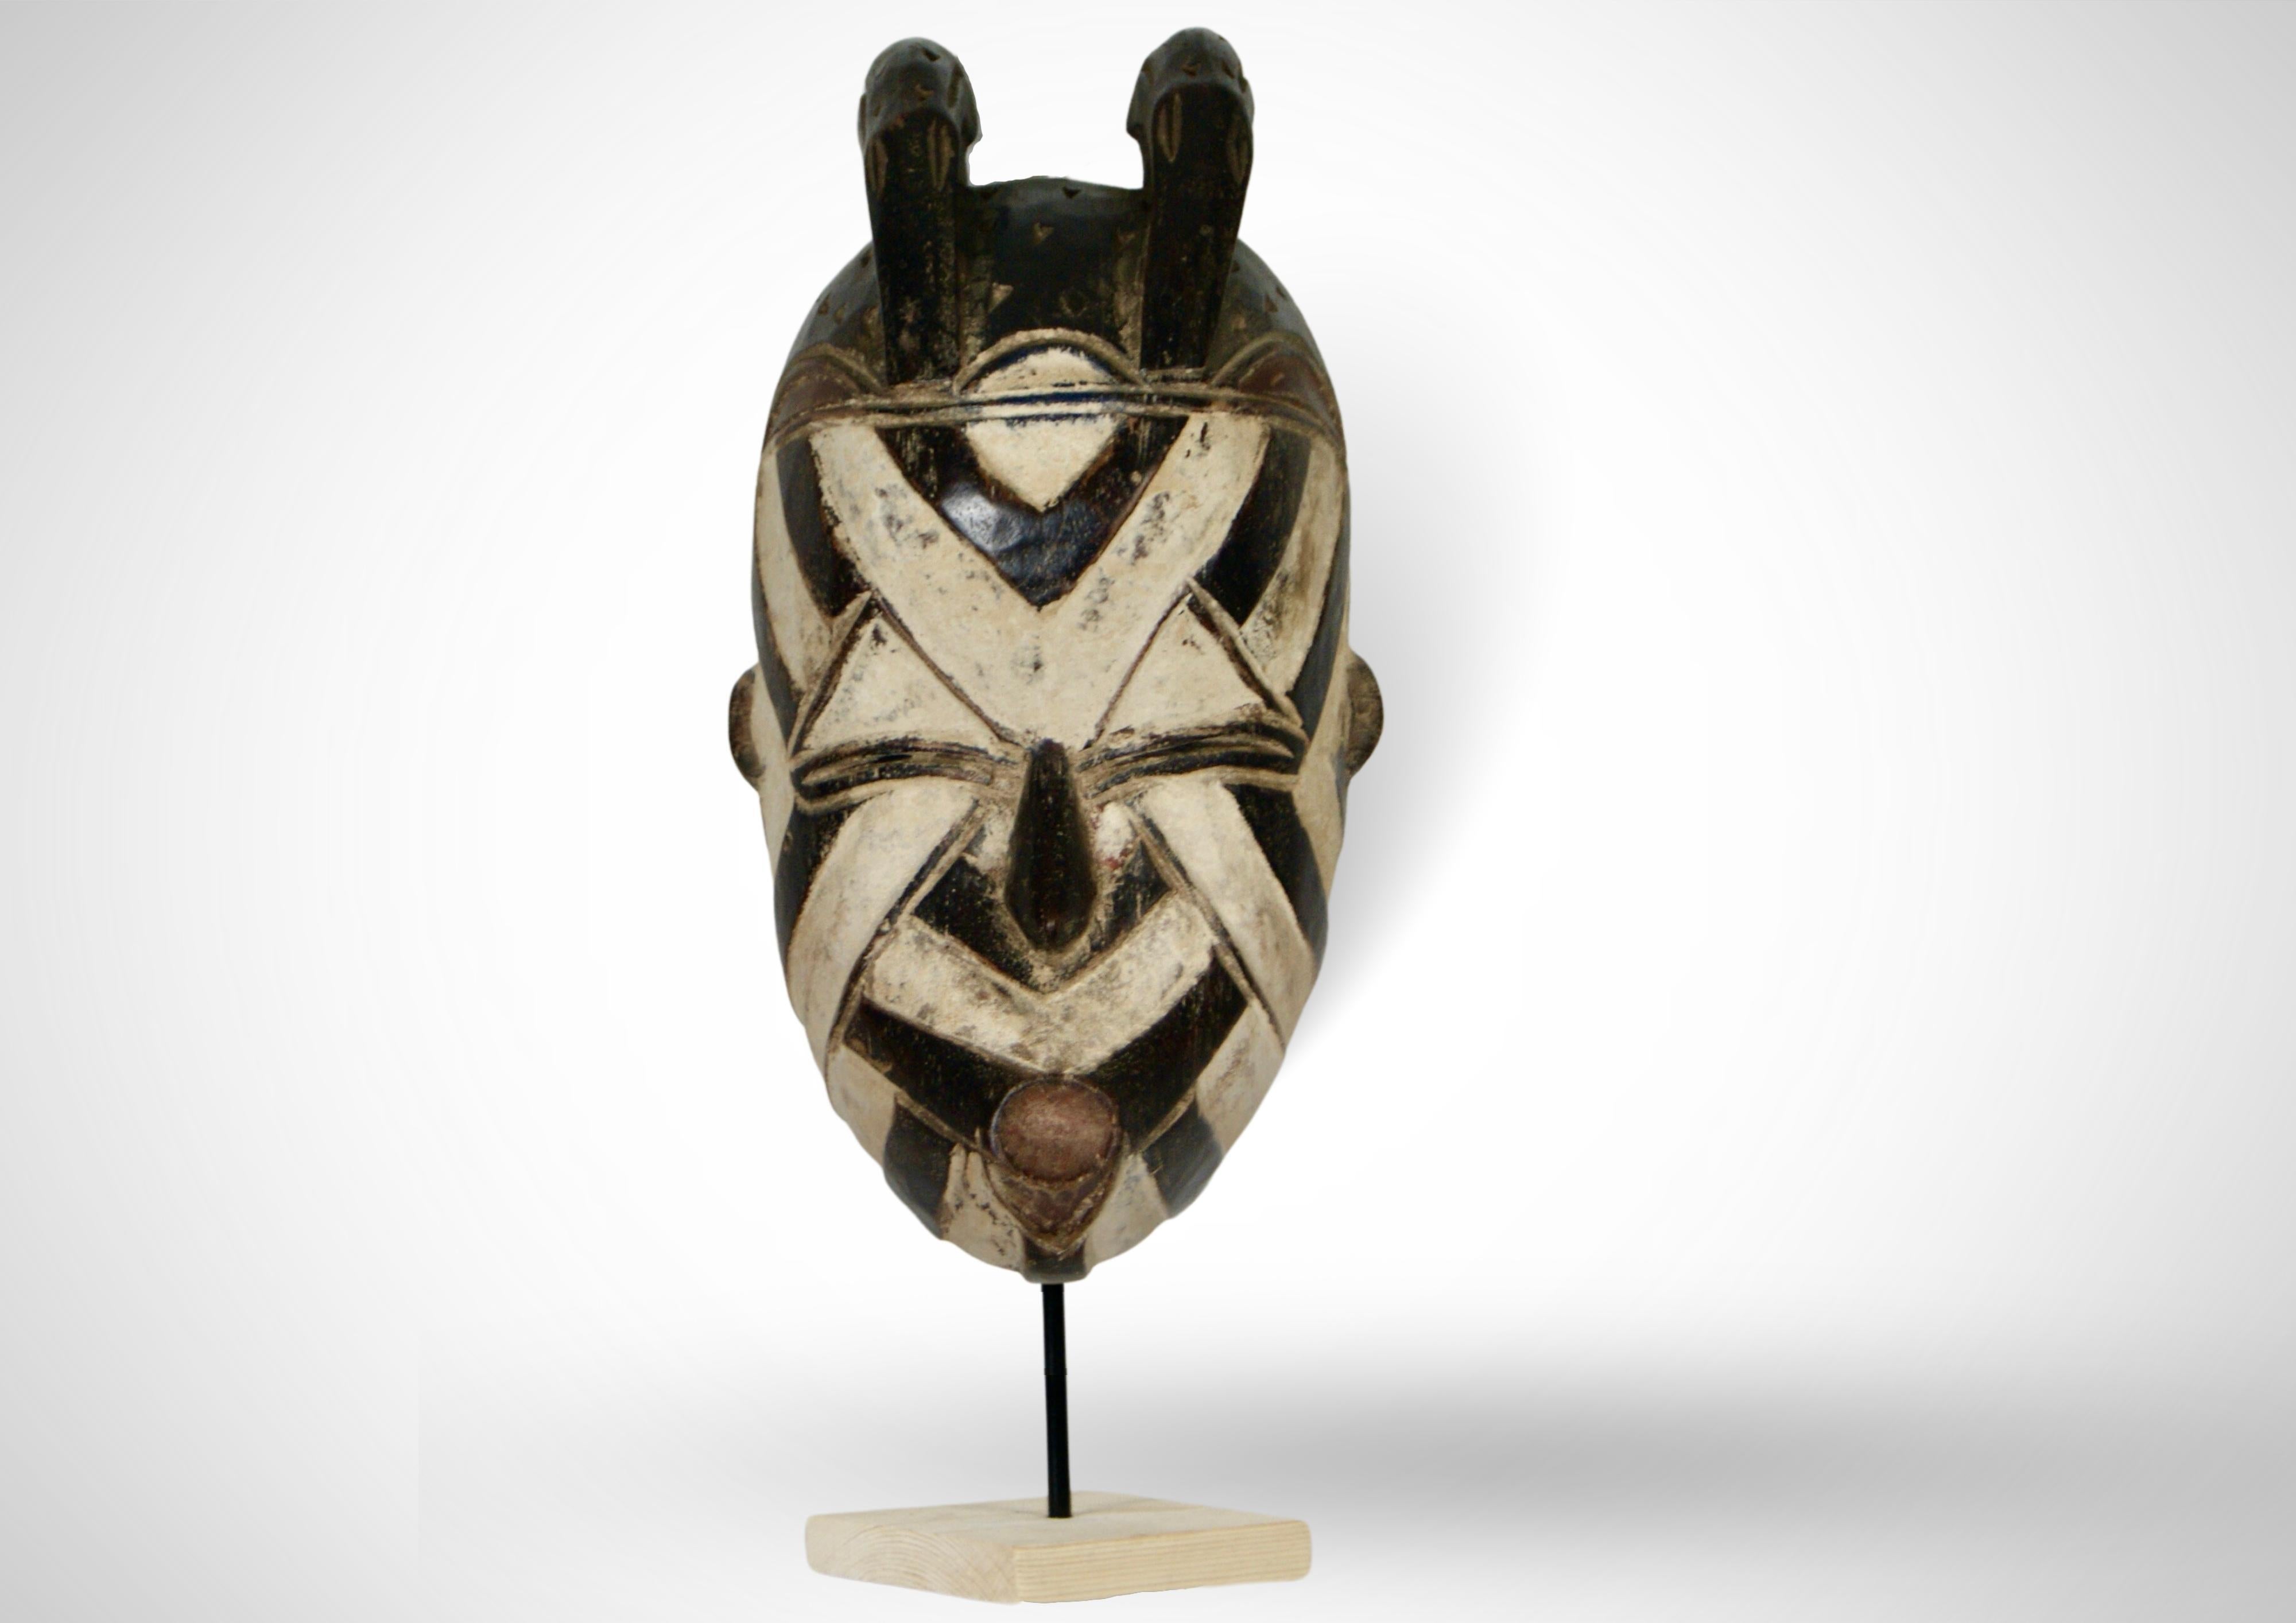 On offer is a Basangwe mask from the Songye people of the Democratic Republic of Congo, circa 1950s.
 
The mask has the typical facial shape of the Basangwe mask.
At the top, it has a pair of stylised birds decorated with punched triangles. Their